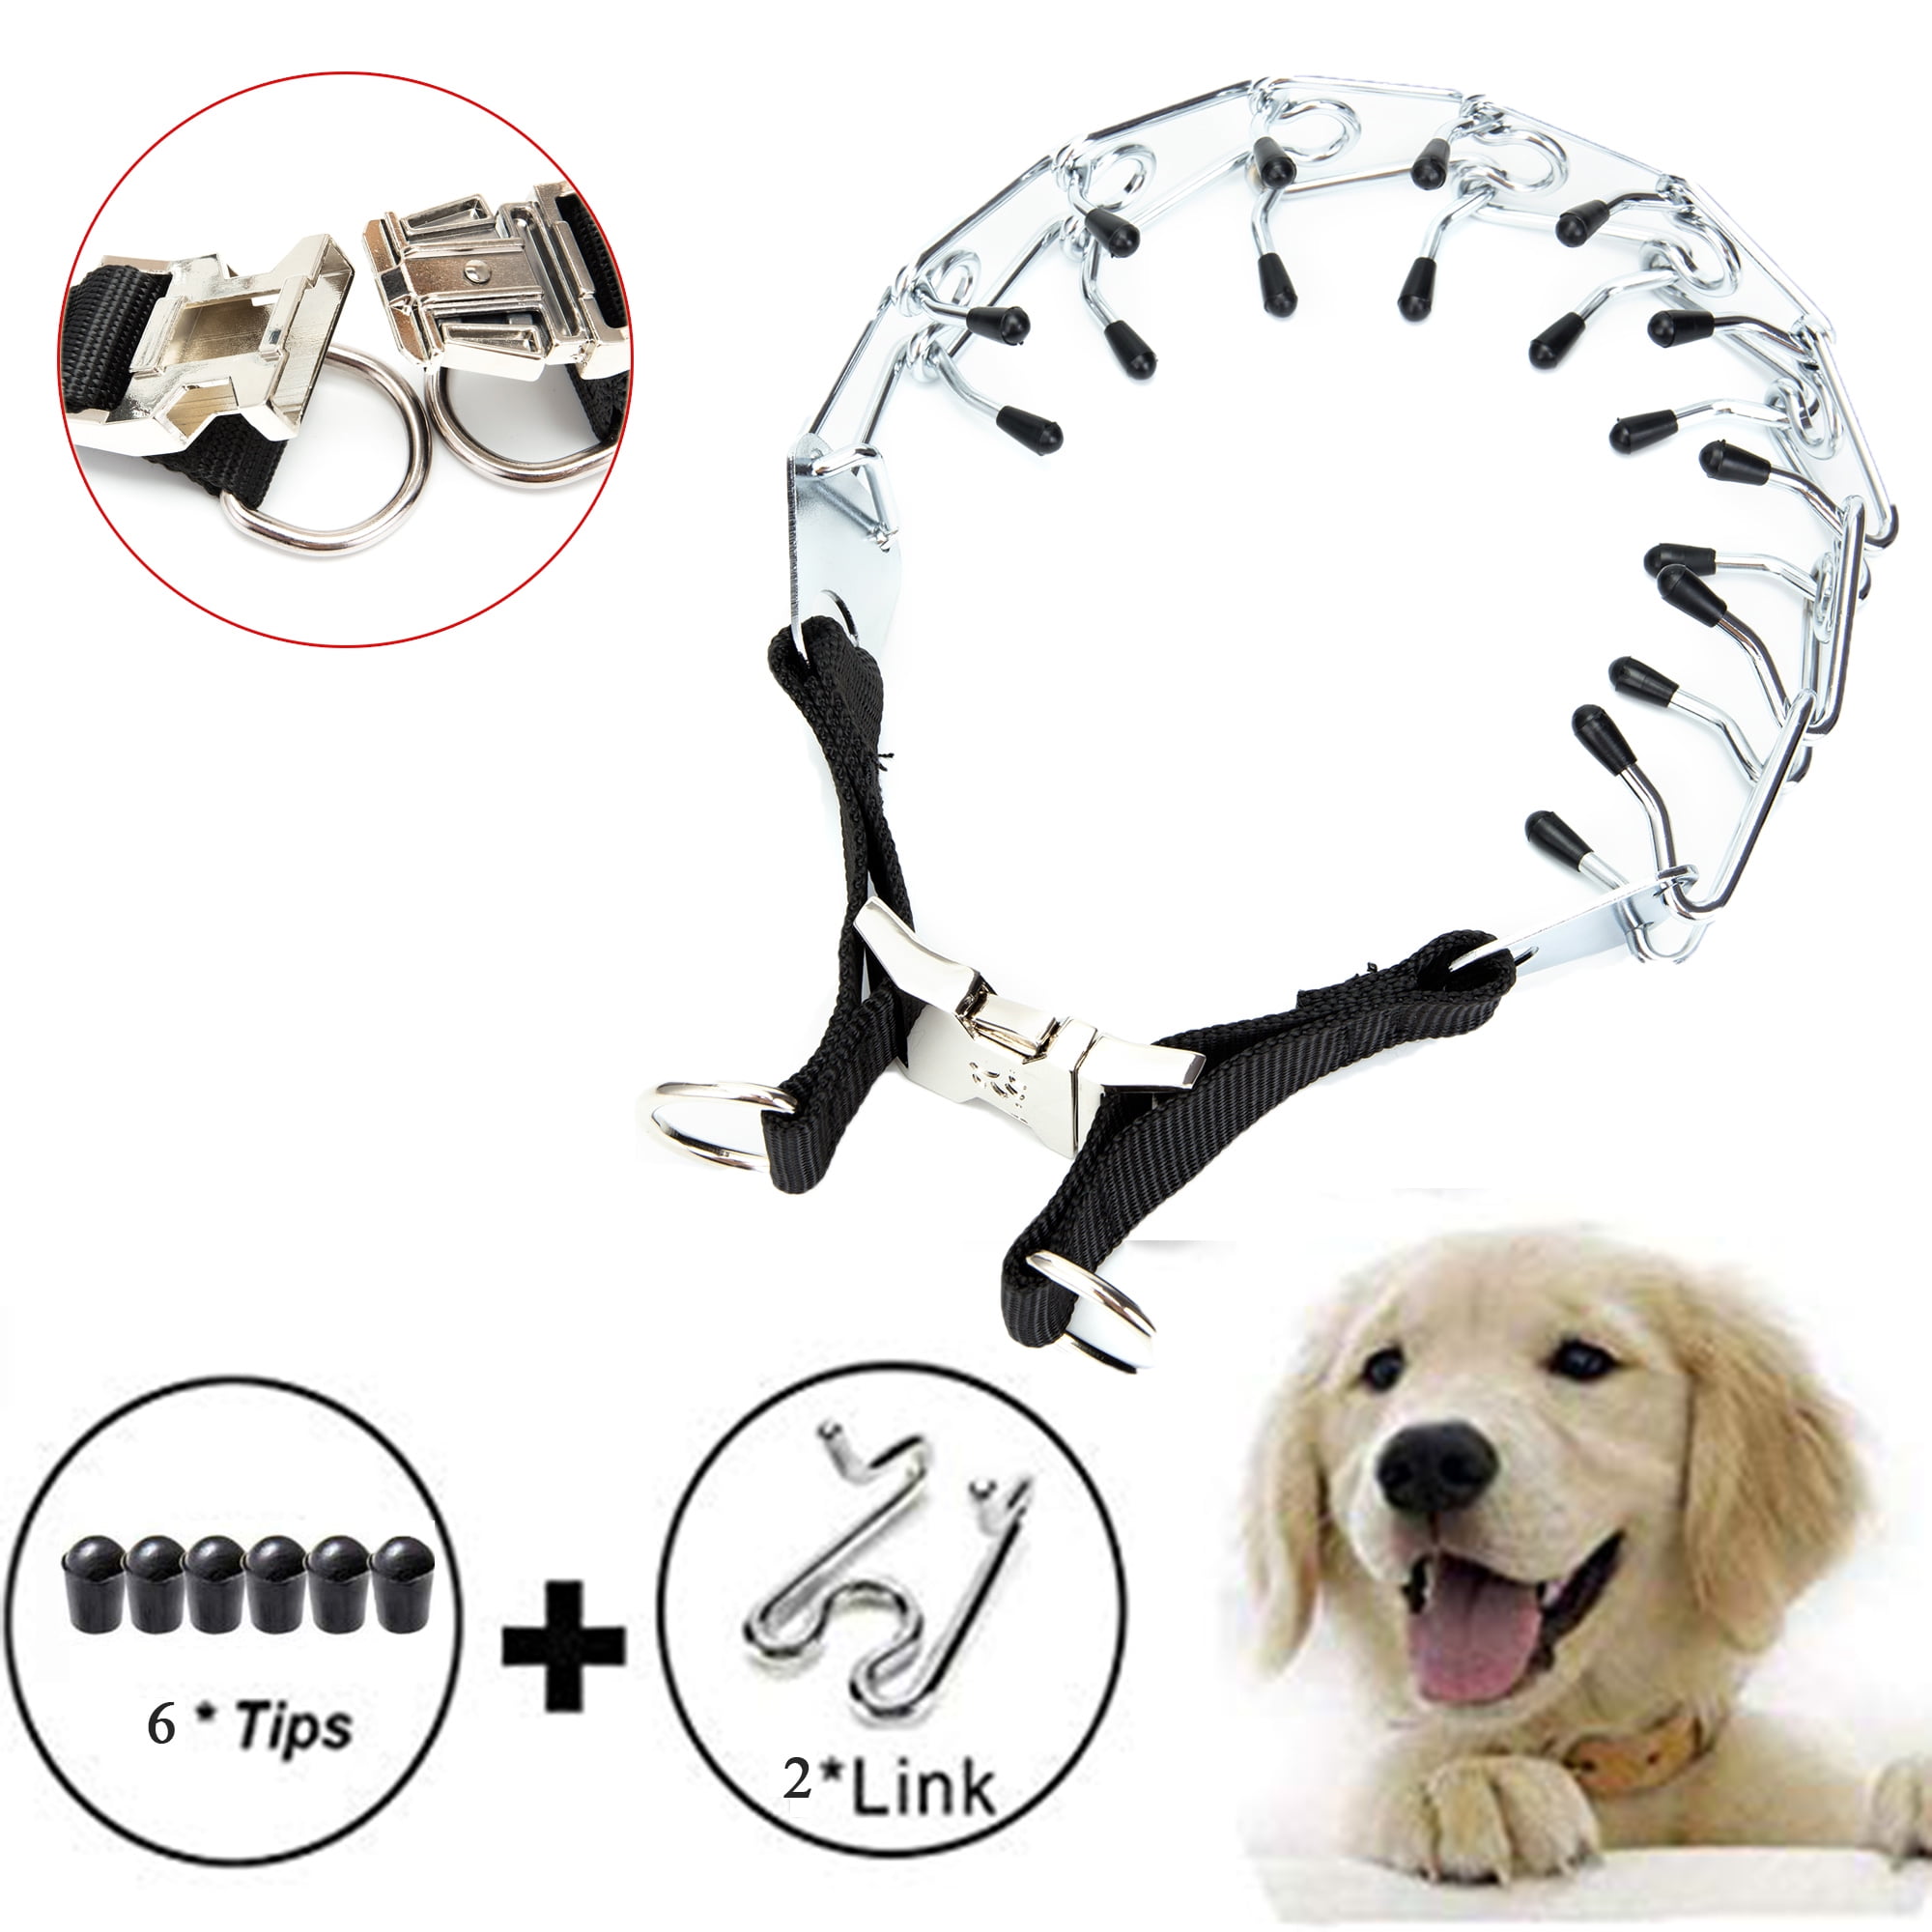 Supet Dog Prong Training Collar Durable Pinch Collar for Dogs Adjustable Pet Choke Collar with Comfort Rubber Tips 